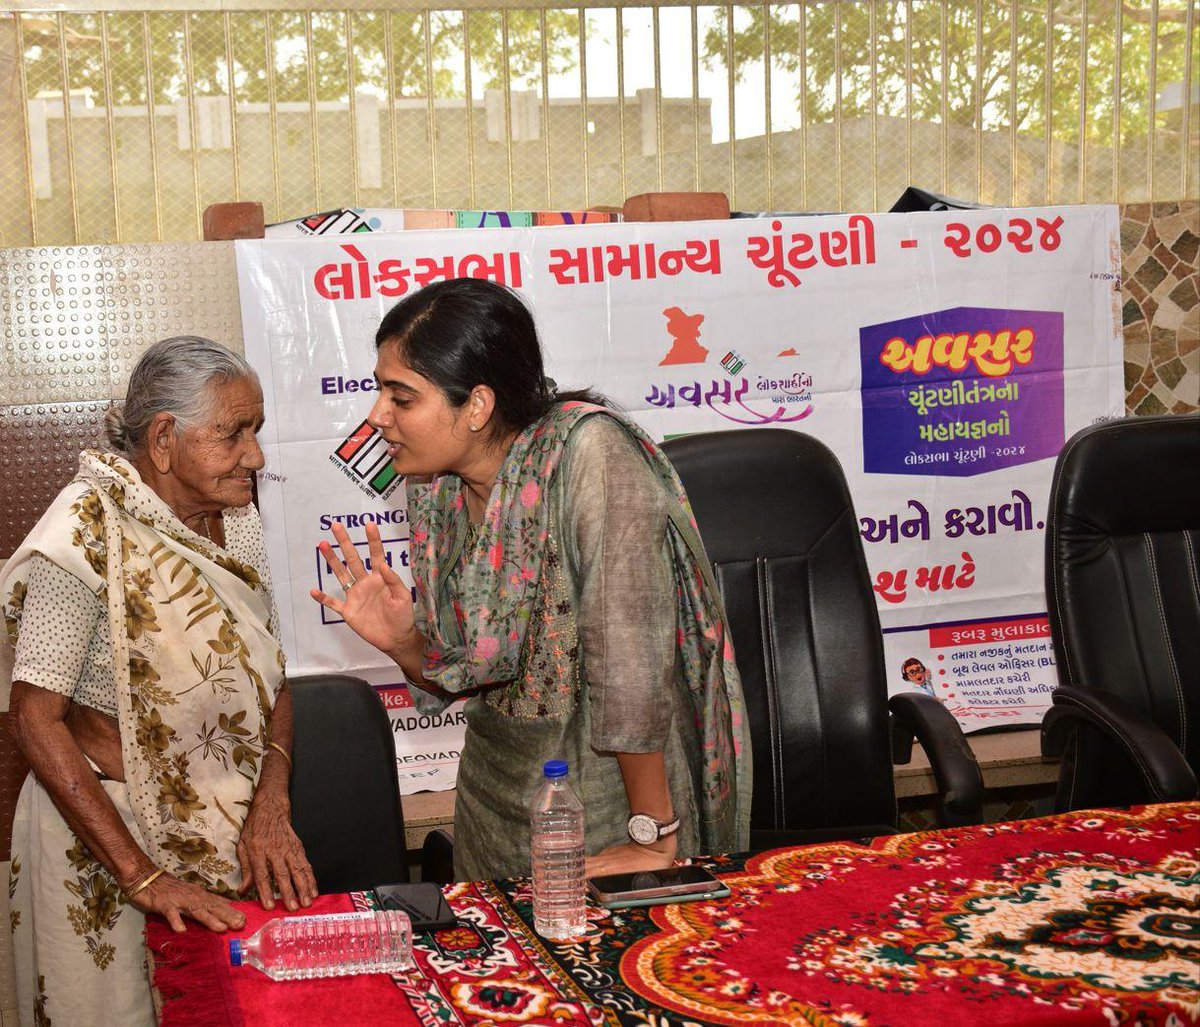 95 year old woman of Sandha village given commitment of voting and appeal all women for 100% voting... she has done voting in all elections @ECISVEEP @CEOGujarat @collectorvadodara @deovadodara @ddo_vadodara